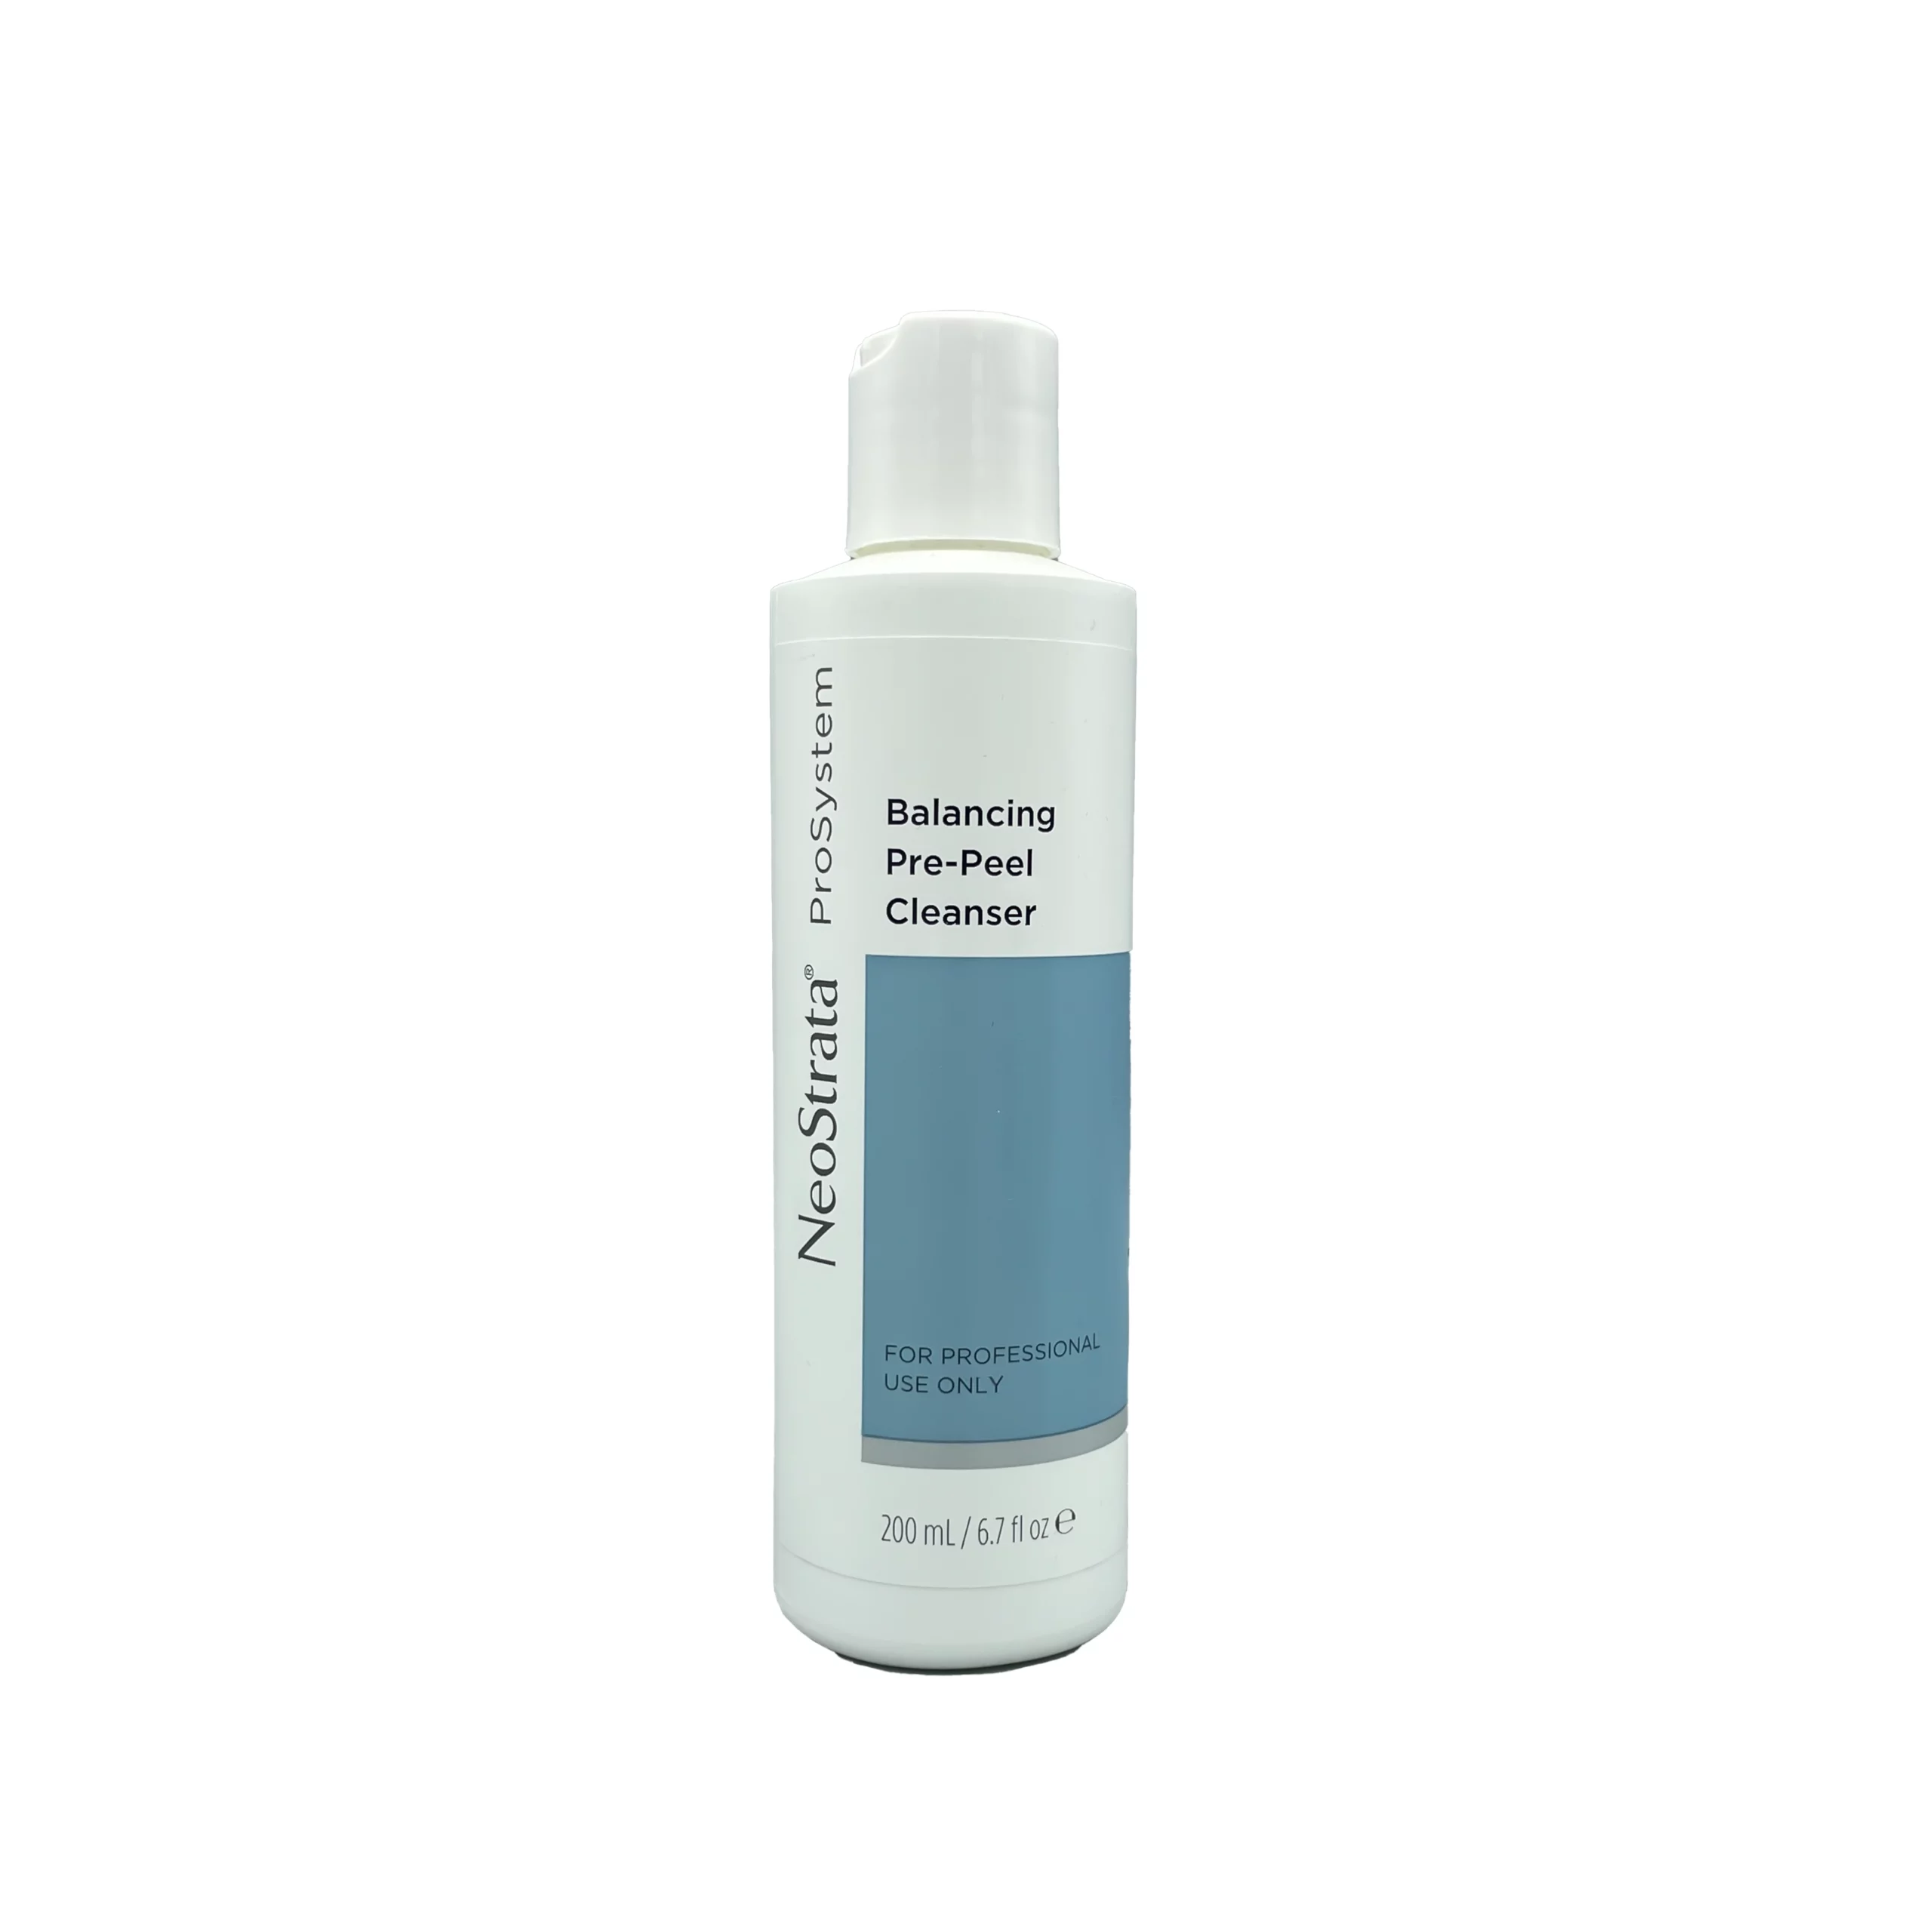 NeoStrata ProSystem Balancing Pre-Peel Cleanser